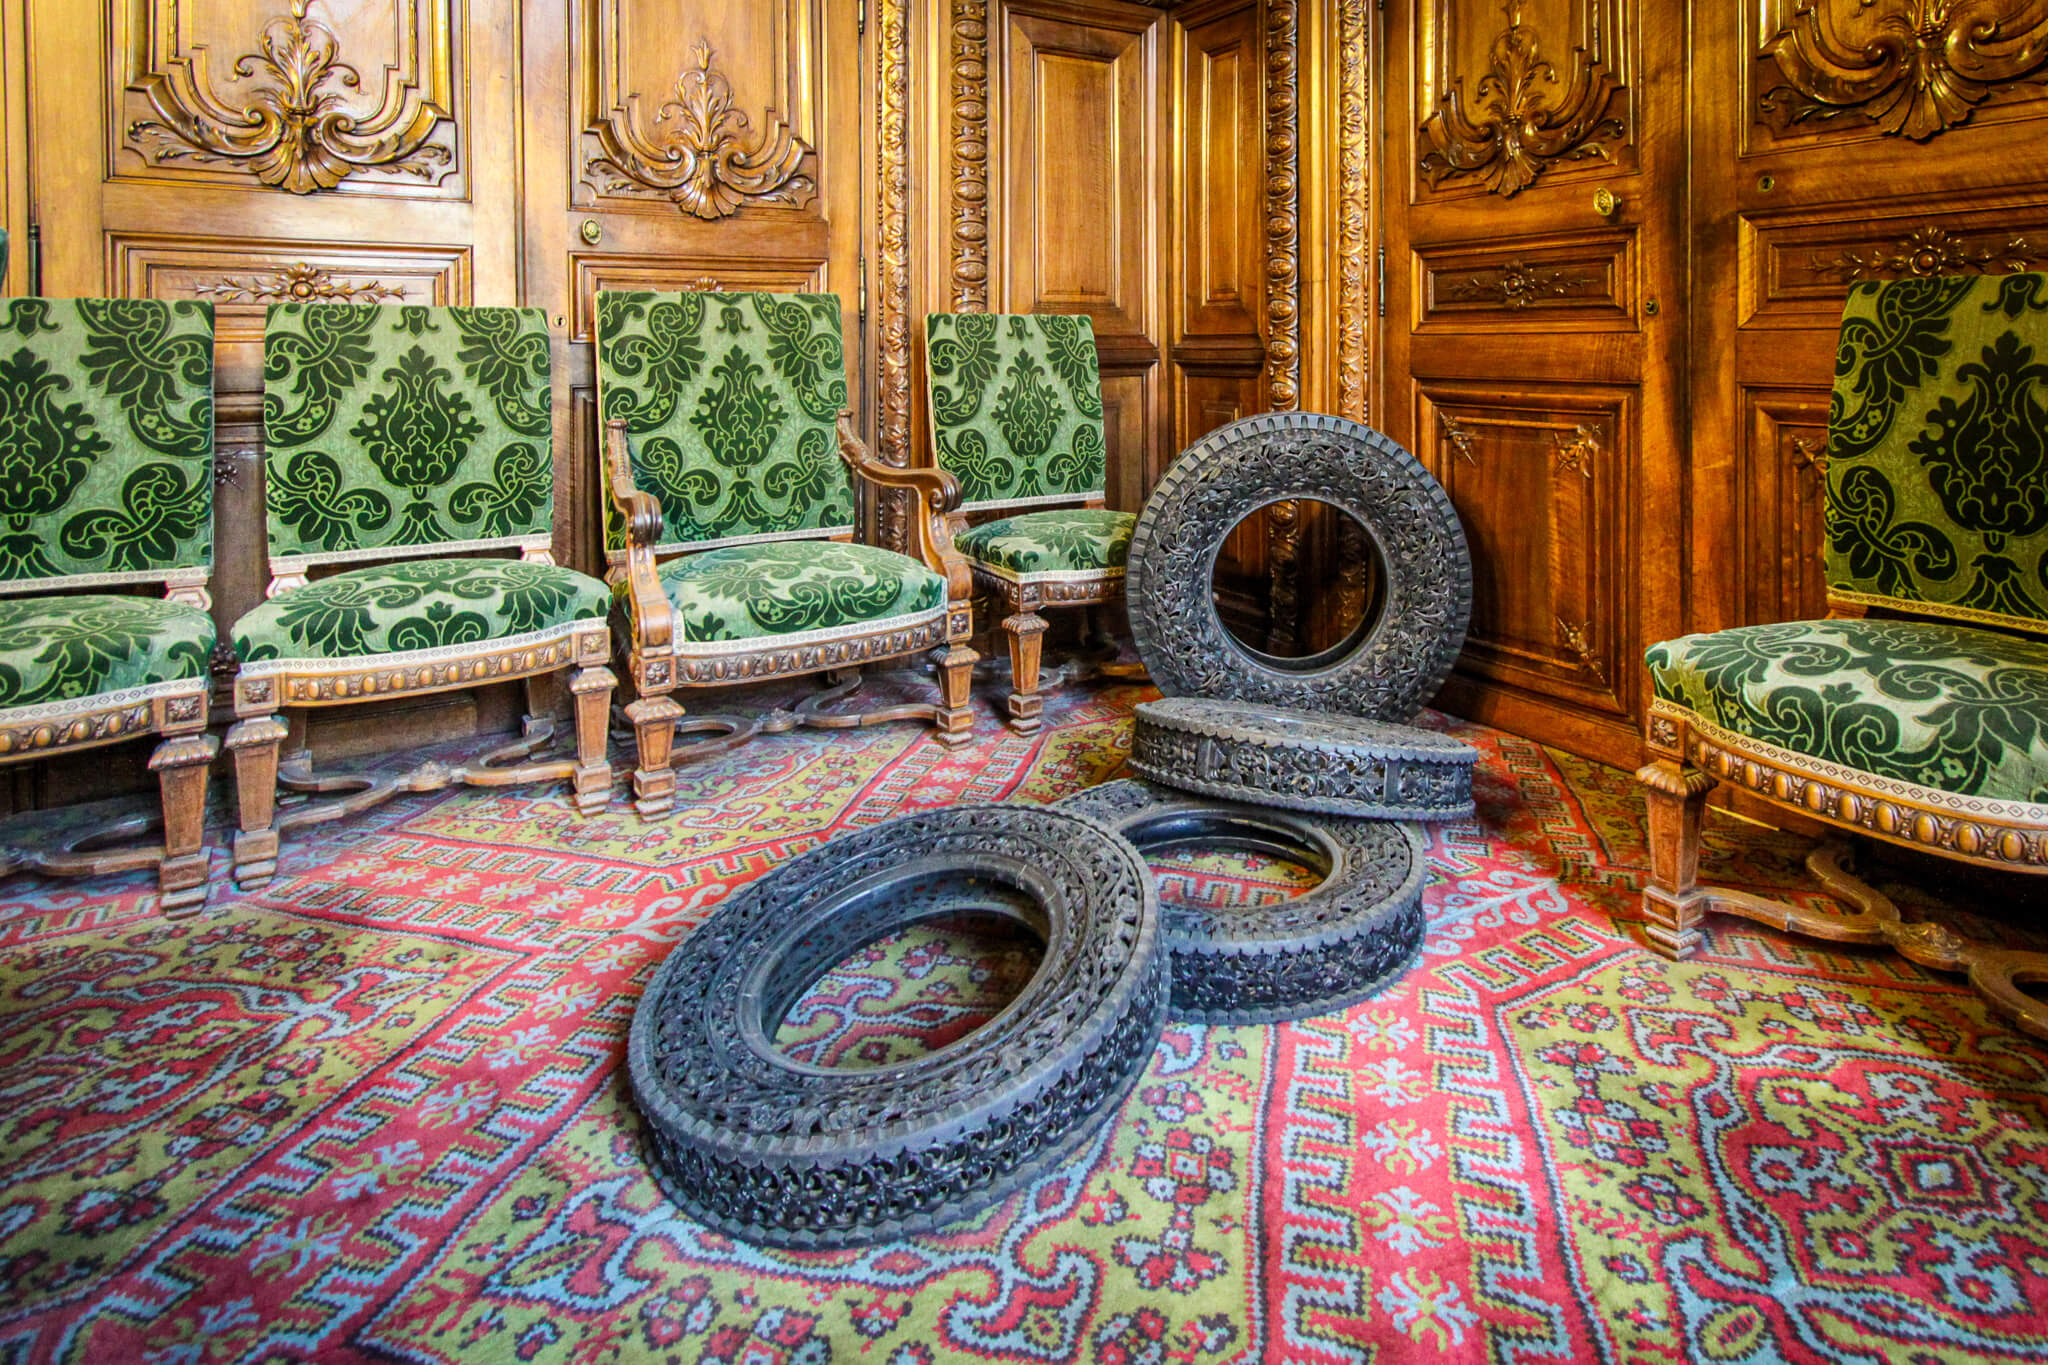 Ornately carved tires featured in a temporary exhibit at the Louvre